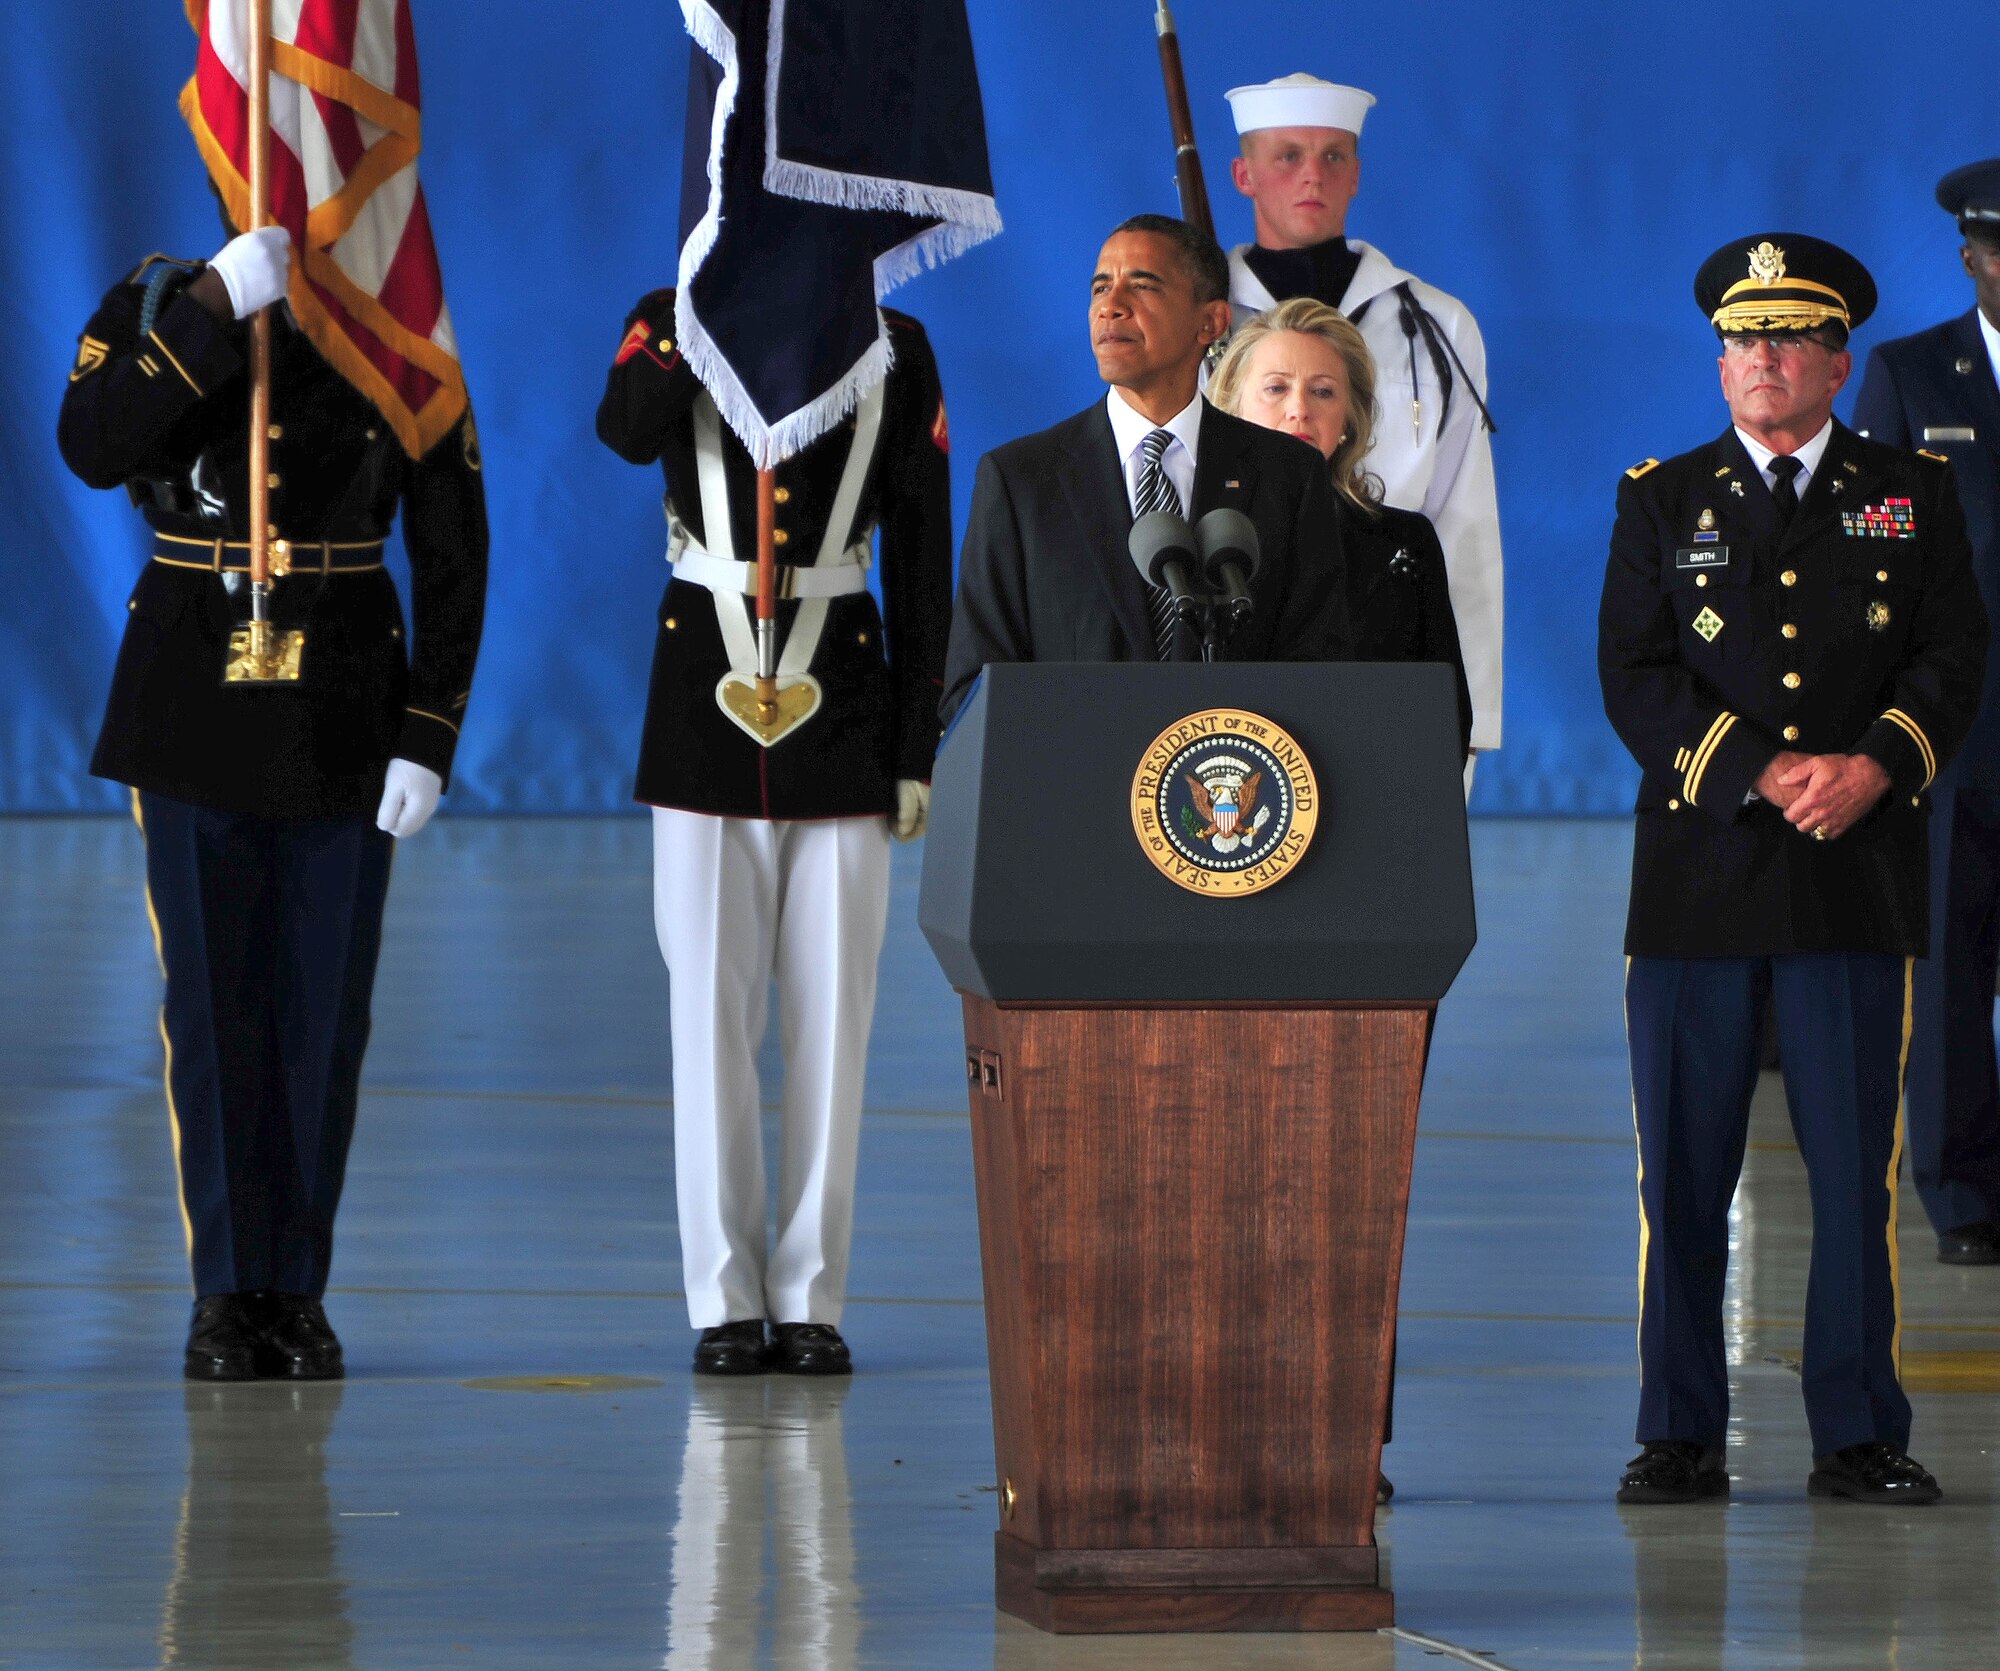 Commander in Chief Barack Obama pauses during a speech Sept. 14 at Joint Base Andrews, Md., to reflect on the lives of individuals killed during attacks to the U.S. consulate Sept. 11, 2012, in Benghazi, Libya. Obama took time with family, friends and service members at the dignified transfer ceremony to honor the sacrifices J. Christopher Stevens, Sean P. Smith, Glen A. Doherty and Tyrone S. Woods made in service to the United States and countries abroad. Ceremonial guard members from across the National Capital Region, representing all branches of the Department of Defense, rendered final honors to the deceased during the ceremony. (U.S. Air Force photo by Senior Airman Steele C. G. Britton)